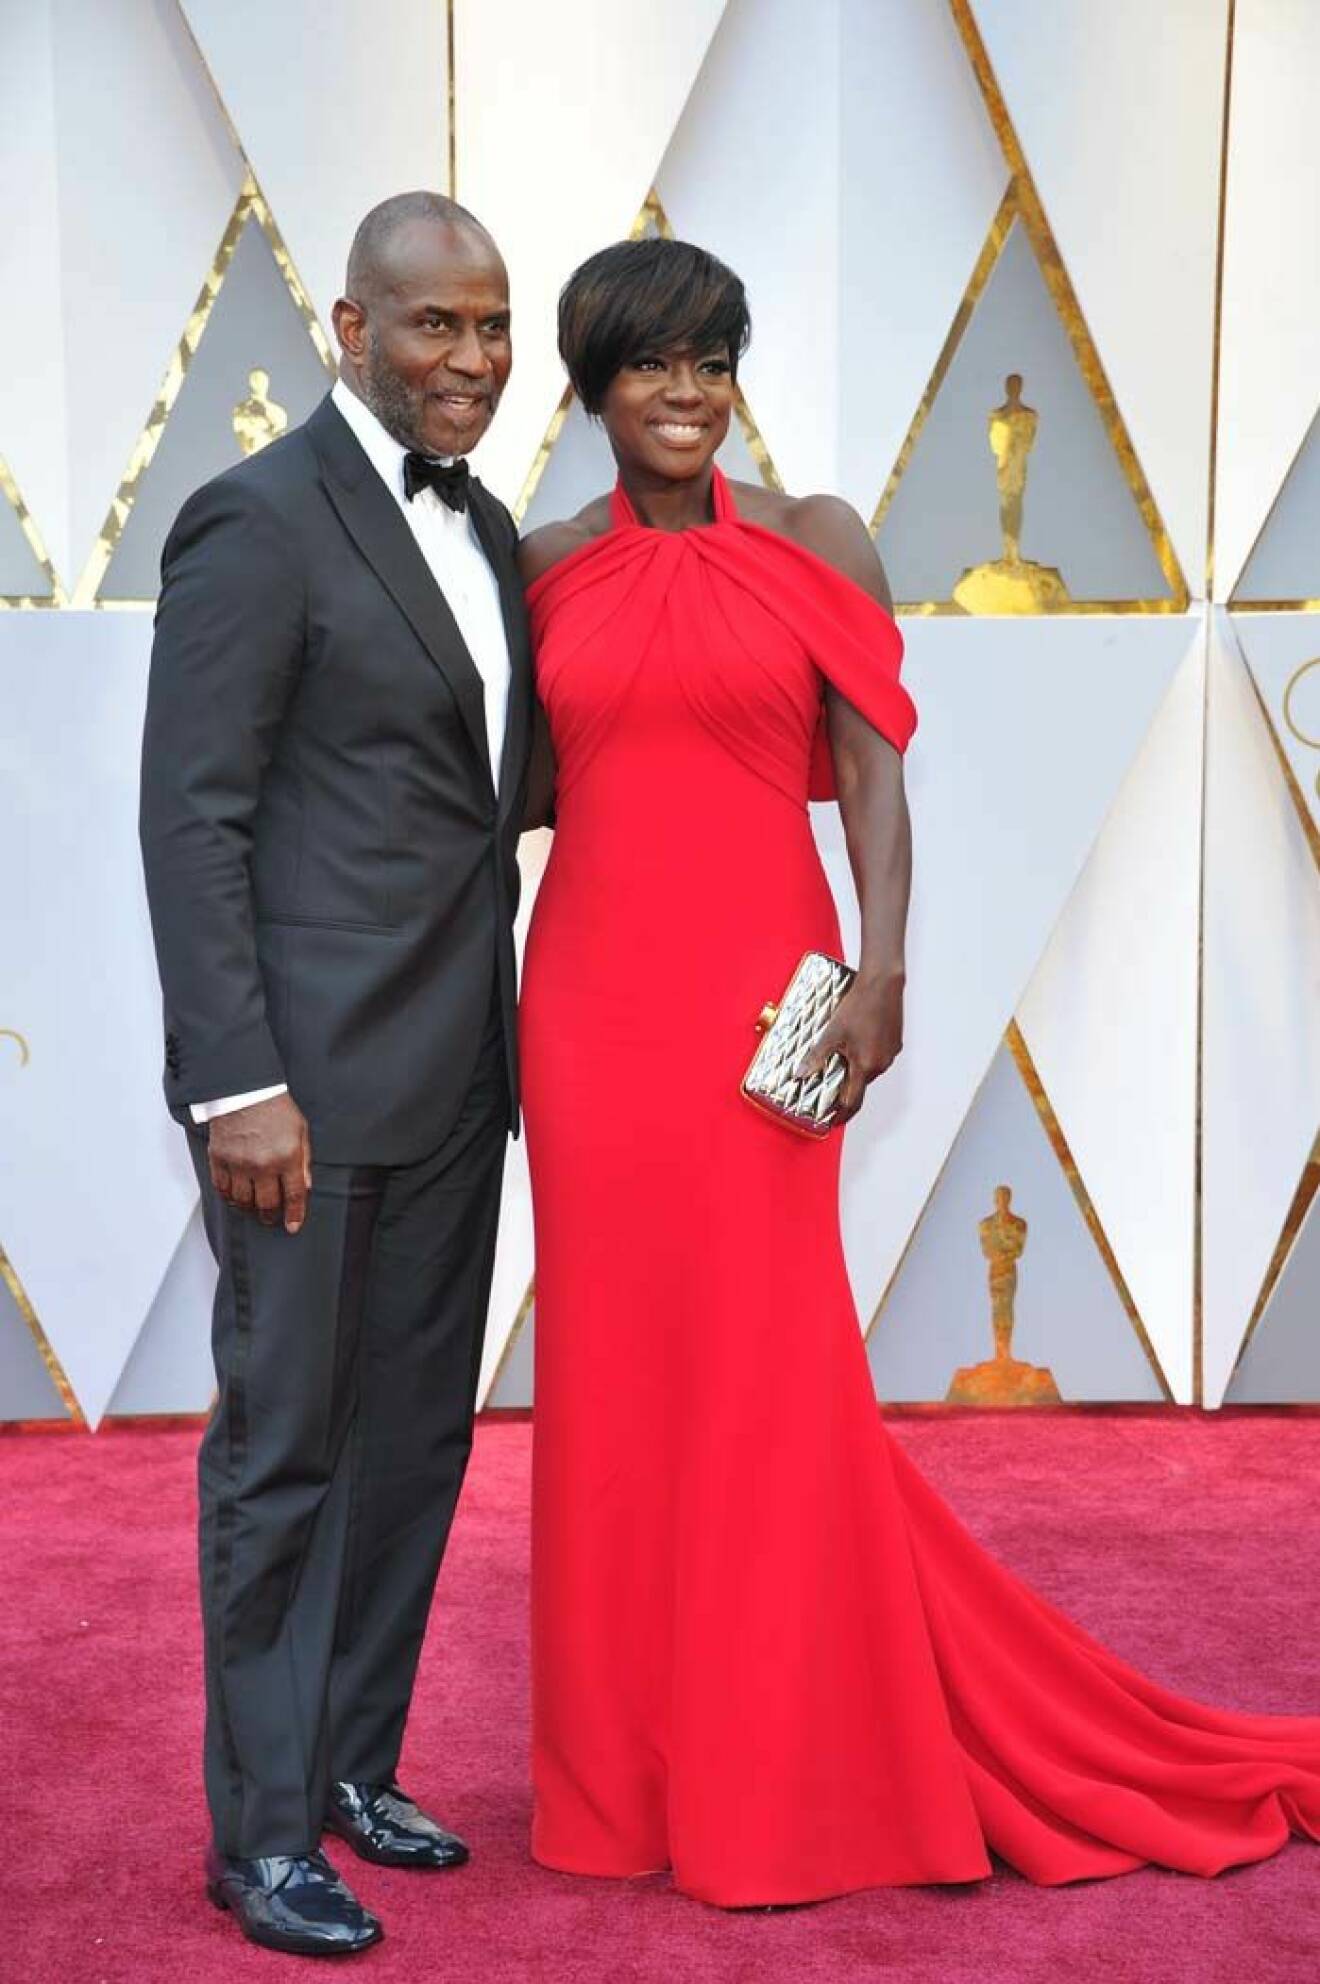 LOS ANGELES, CA - FEBRUARY 26: Julius Tennon and Viola Davis at the 89th Academy Awards at the Dolby Theatre in Los Angeles, California on February 26, 2017. Credit: mpi99/MediaPunch